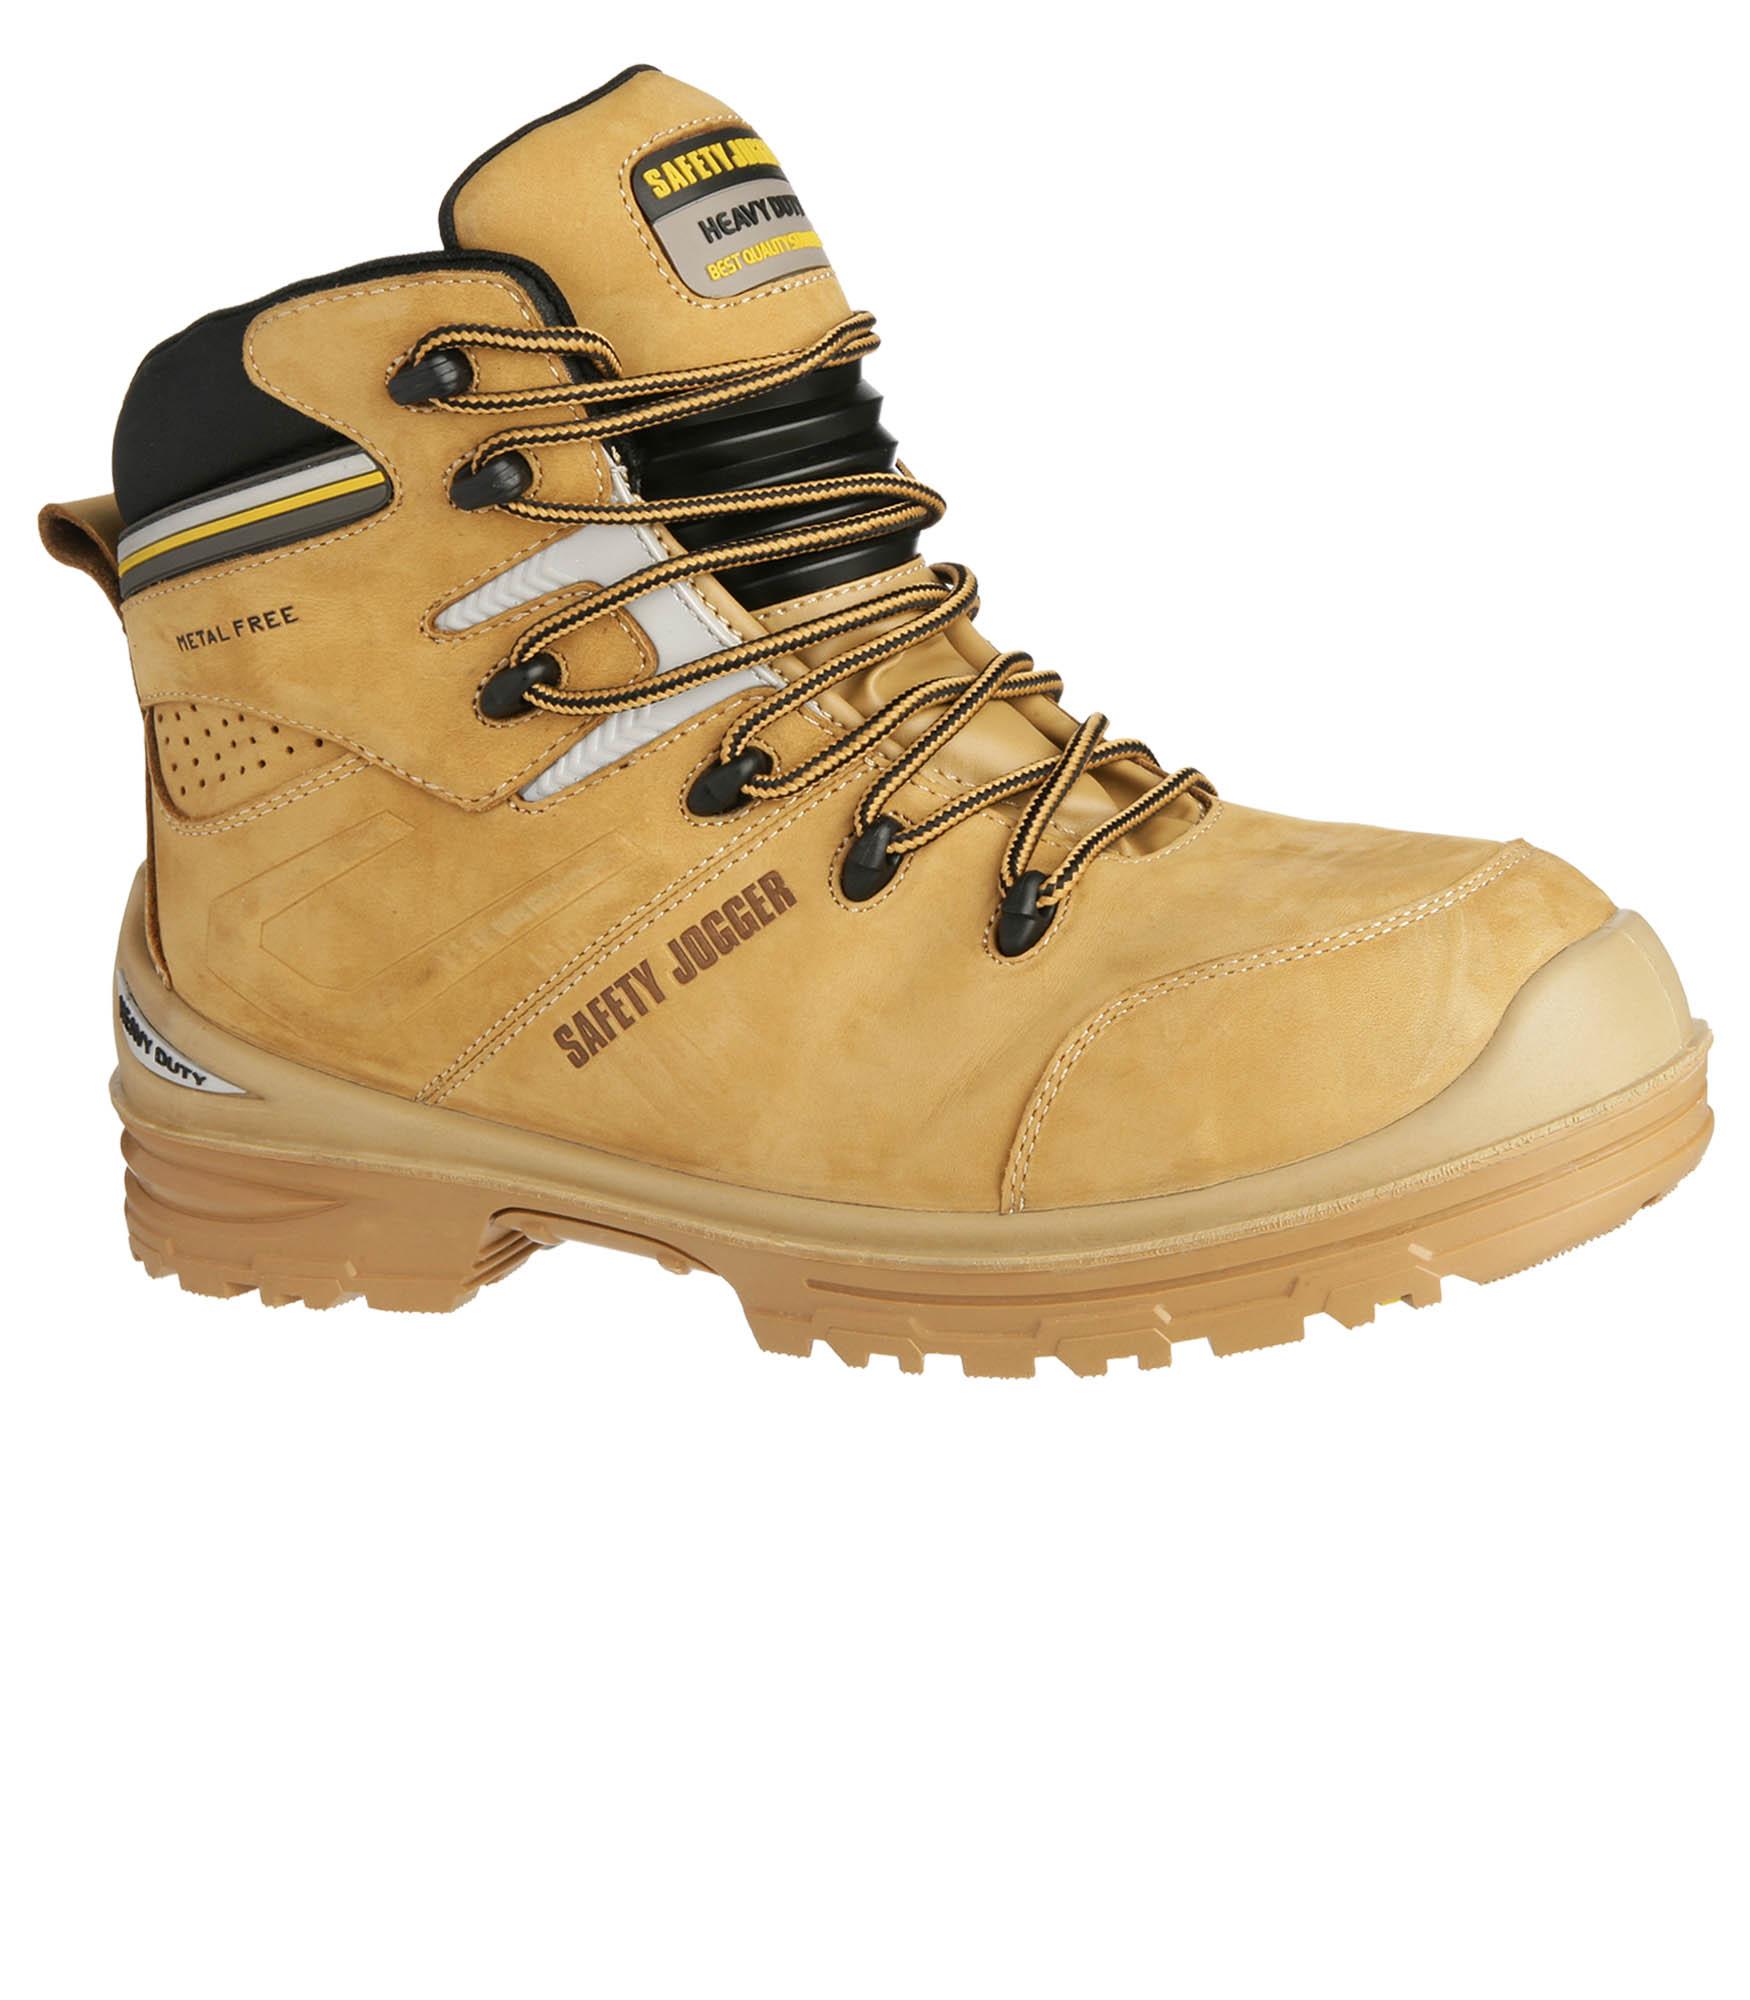 High Cut Safety Shoes CLEARANCE SALE 